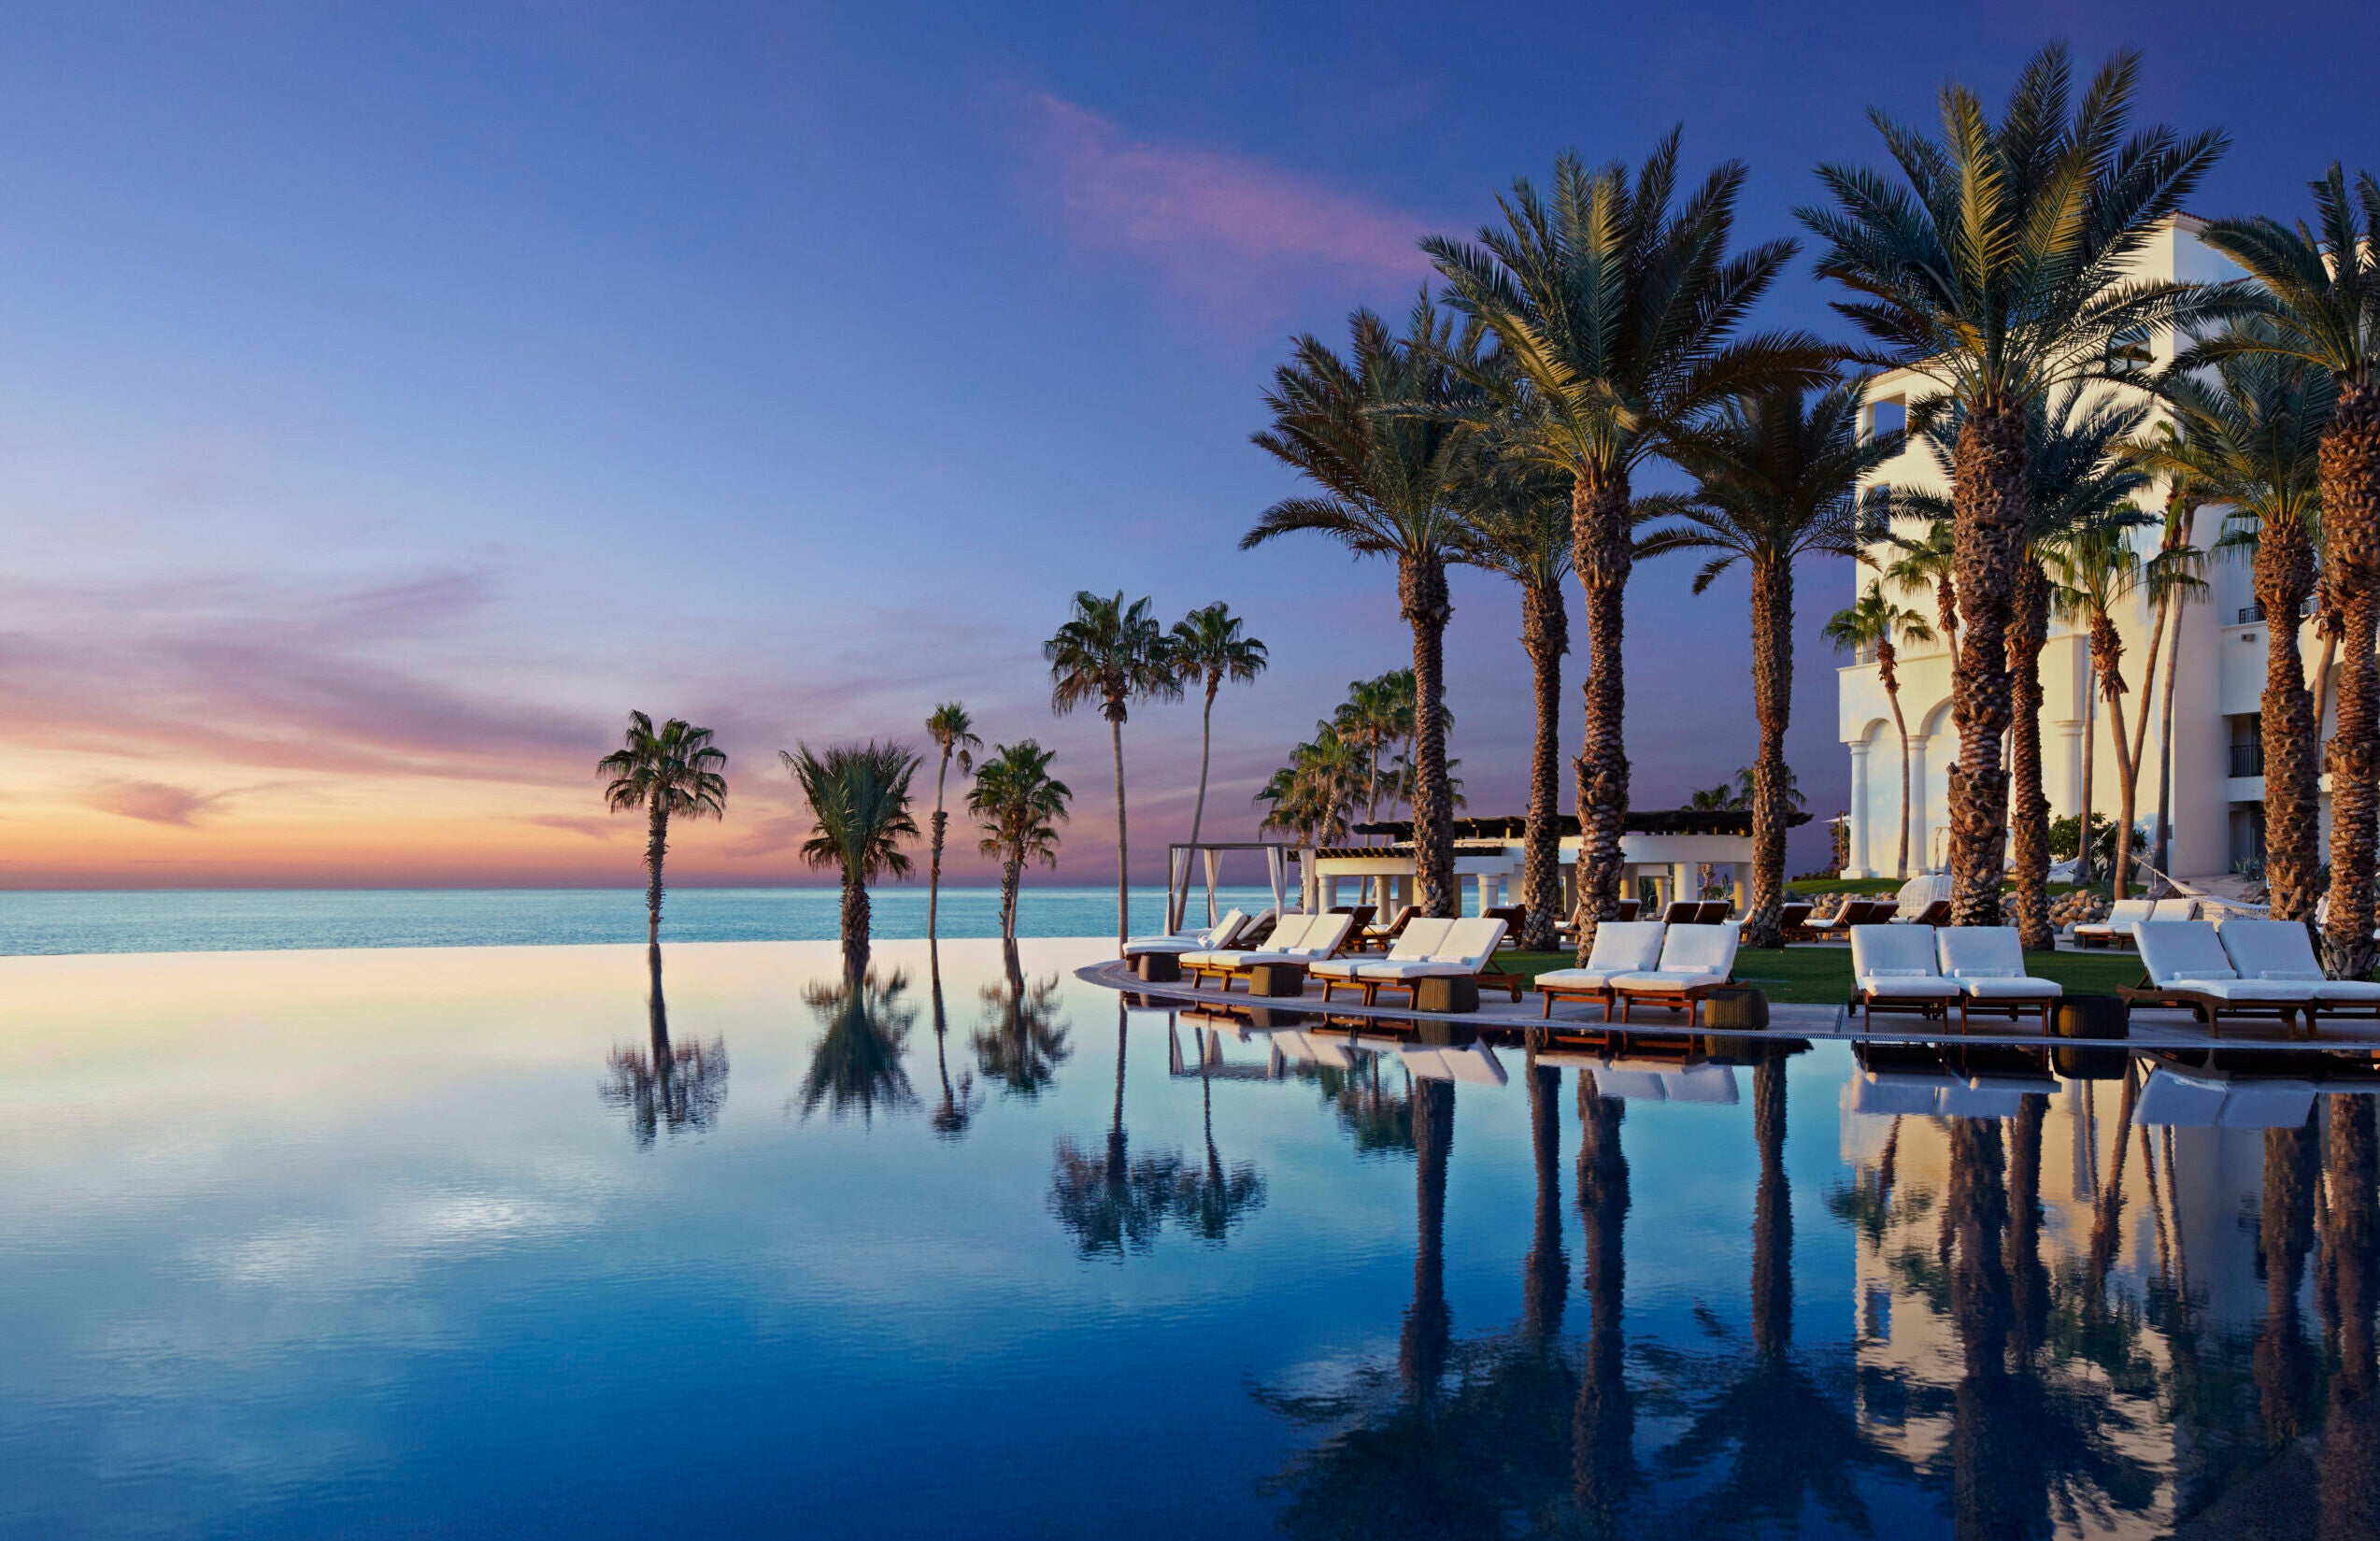 Los Cabos: The Best of the Best